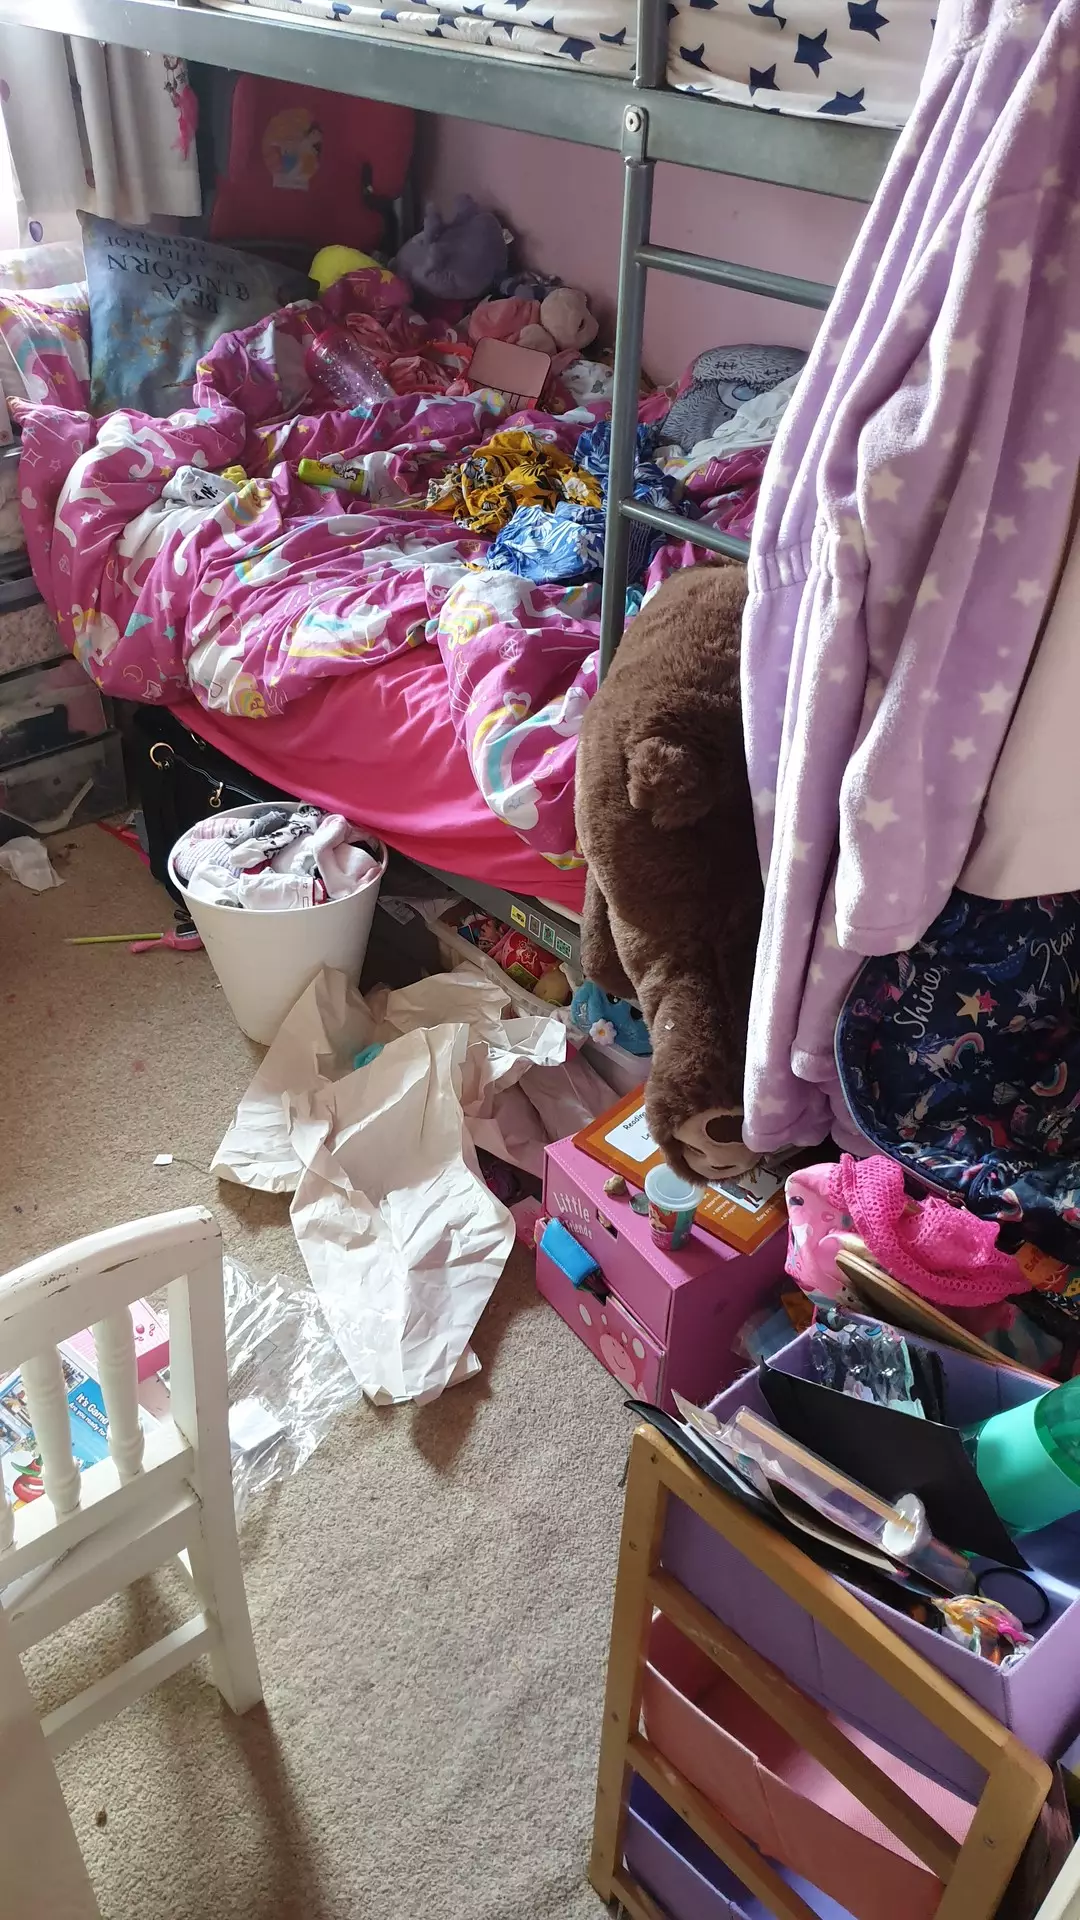 Phil Newis, from Leeds, submitted an image of his daughter's room (